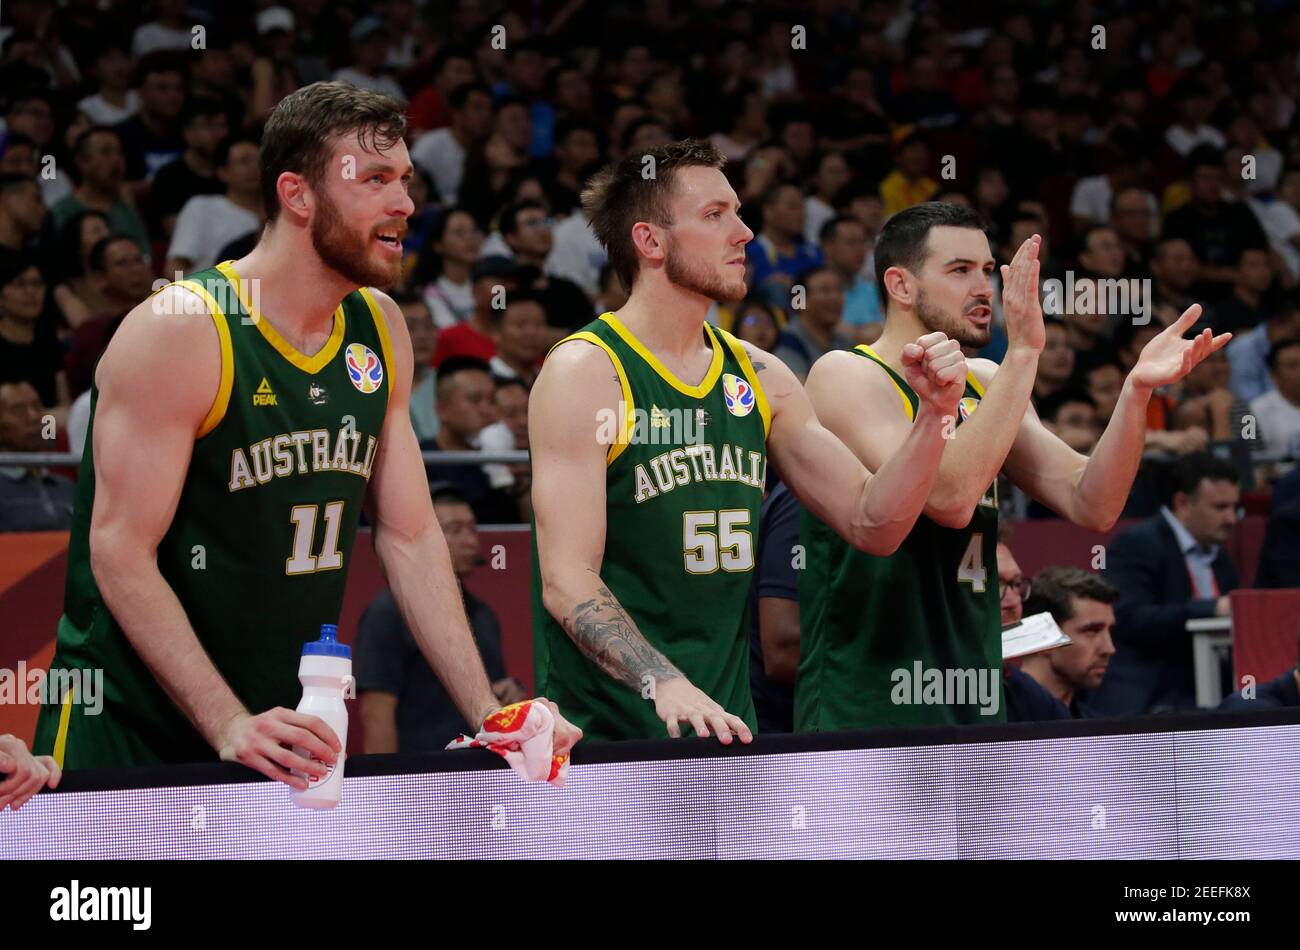 Basketball - FIBA World Cup - 3rd Place Game - France v Australia - Wukesong Sport Arena, Beijing, China - September 15, 2019  Australia's Nic Kay, Mitch Creek and Chris Goulding on the bench during the match REUTERS/Jason Lee Stock Photo